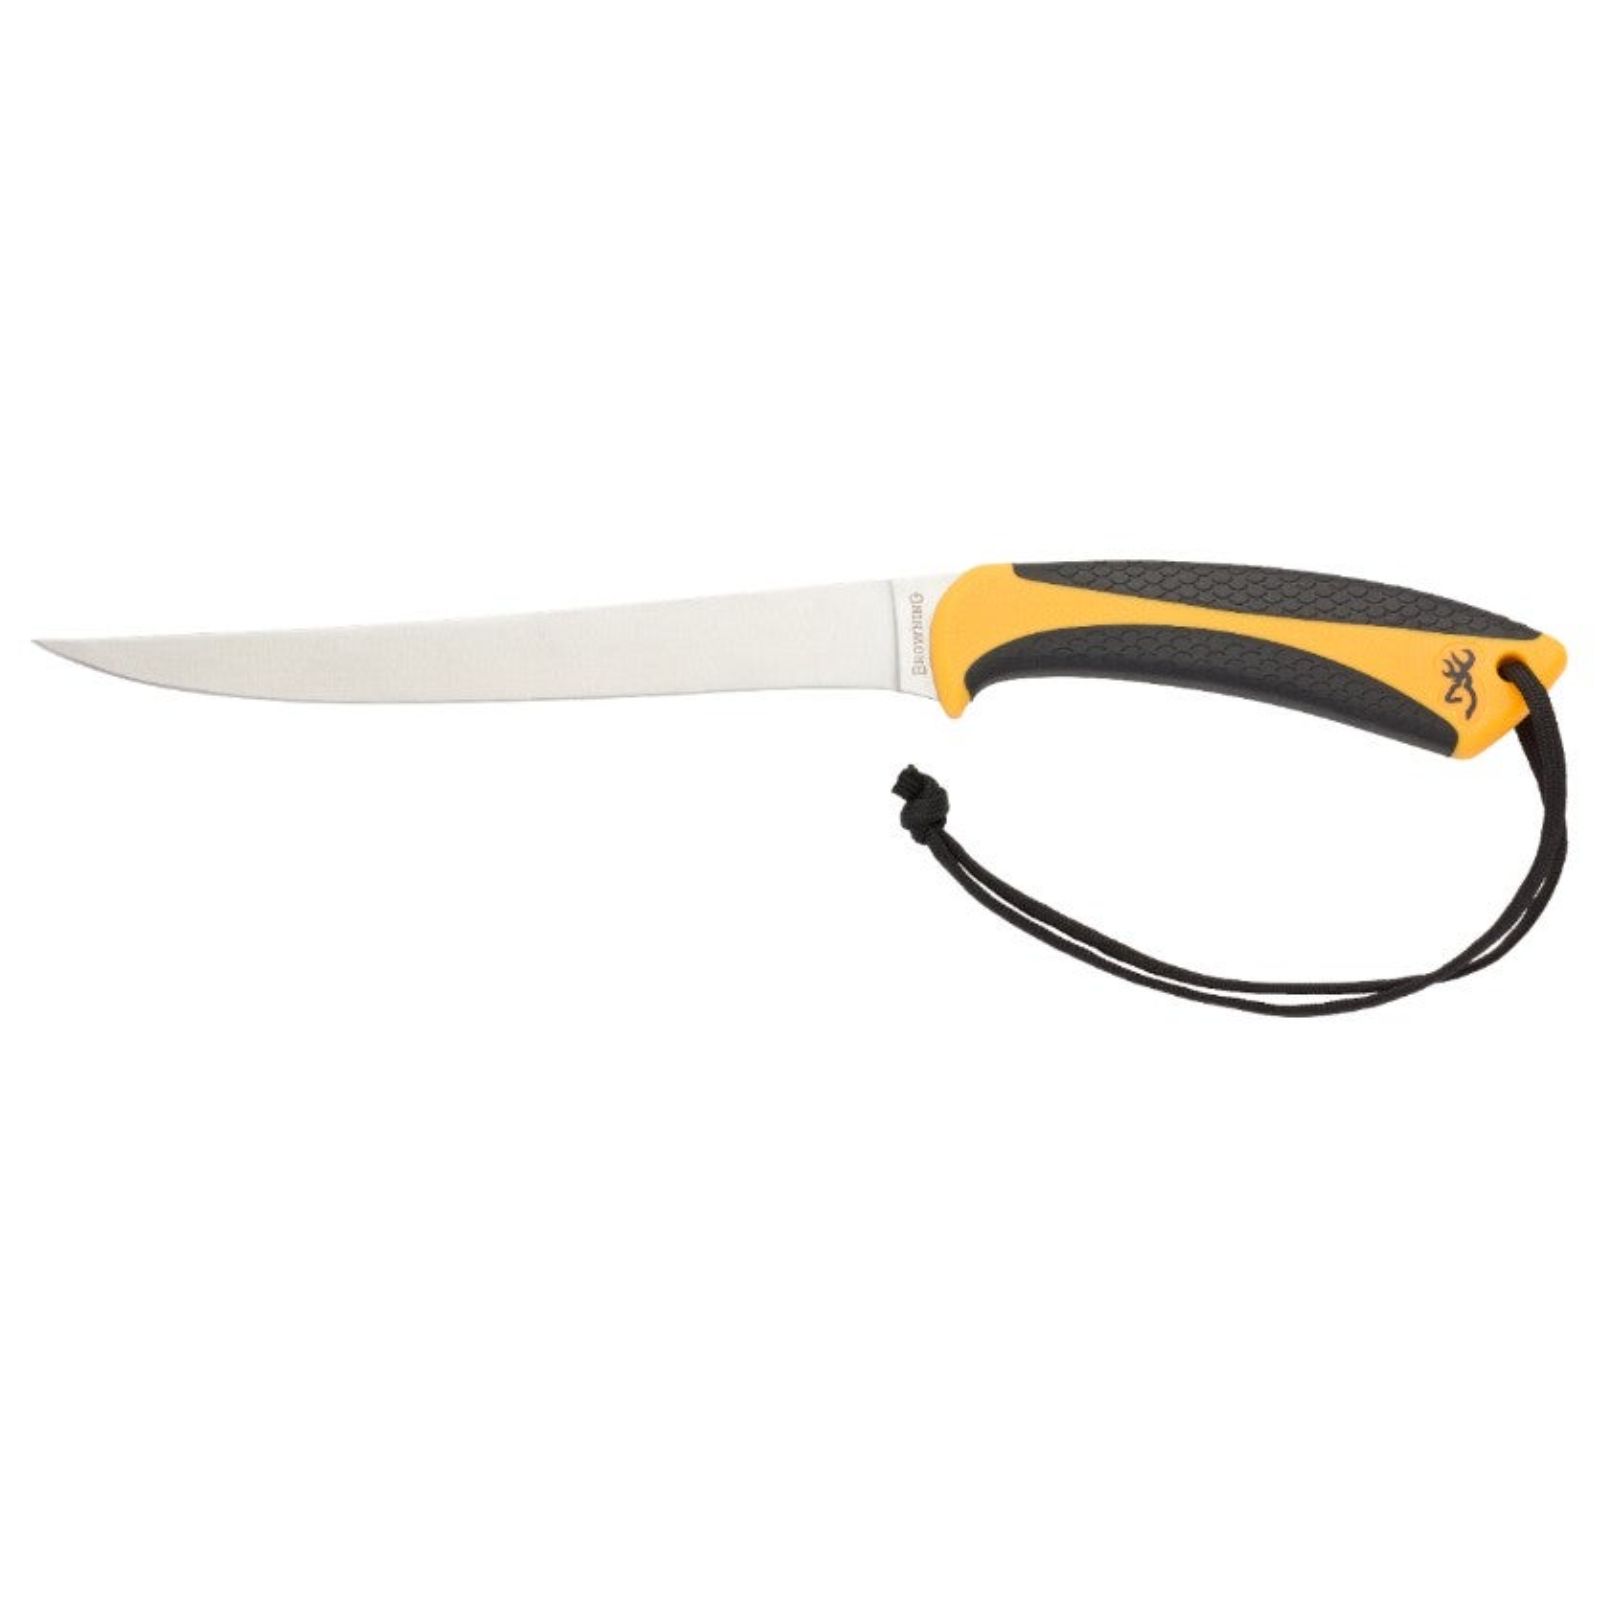 The Browning White Water Fillet knife is designed to withstand and thrive in wet conditions. It is made from rust-resistant stainless steel with just the right amount of flex for making precise fillet...